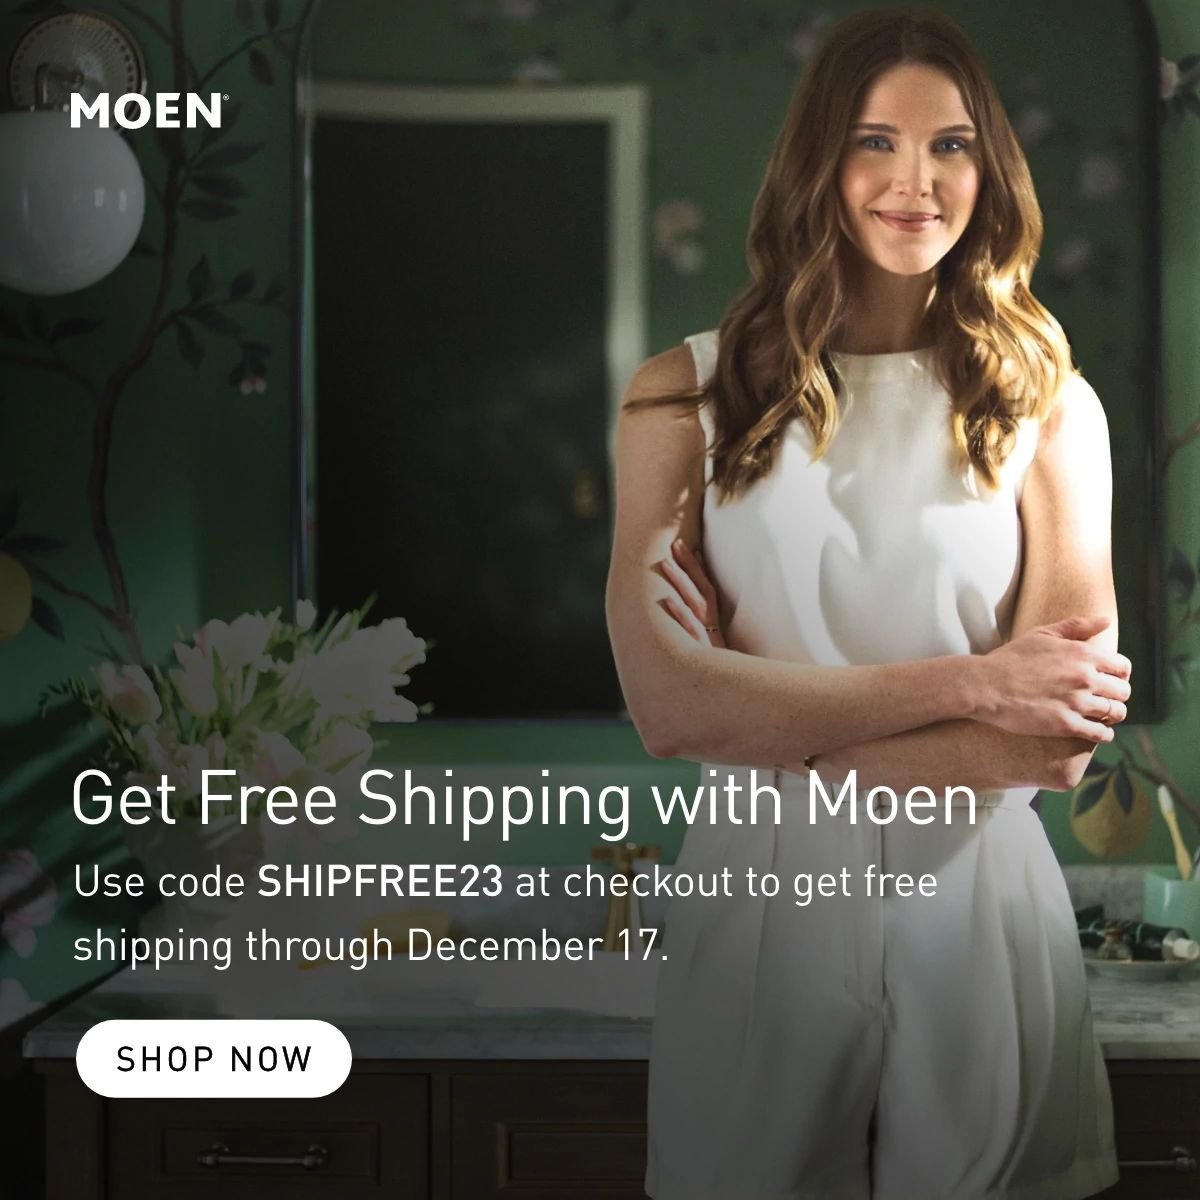 Get Free Shipping with Moen